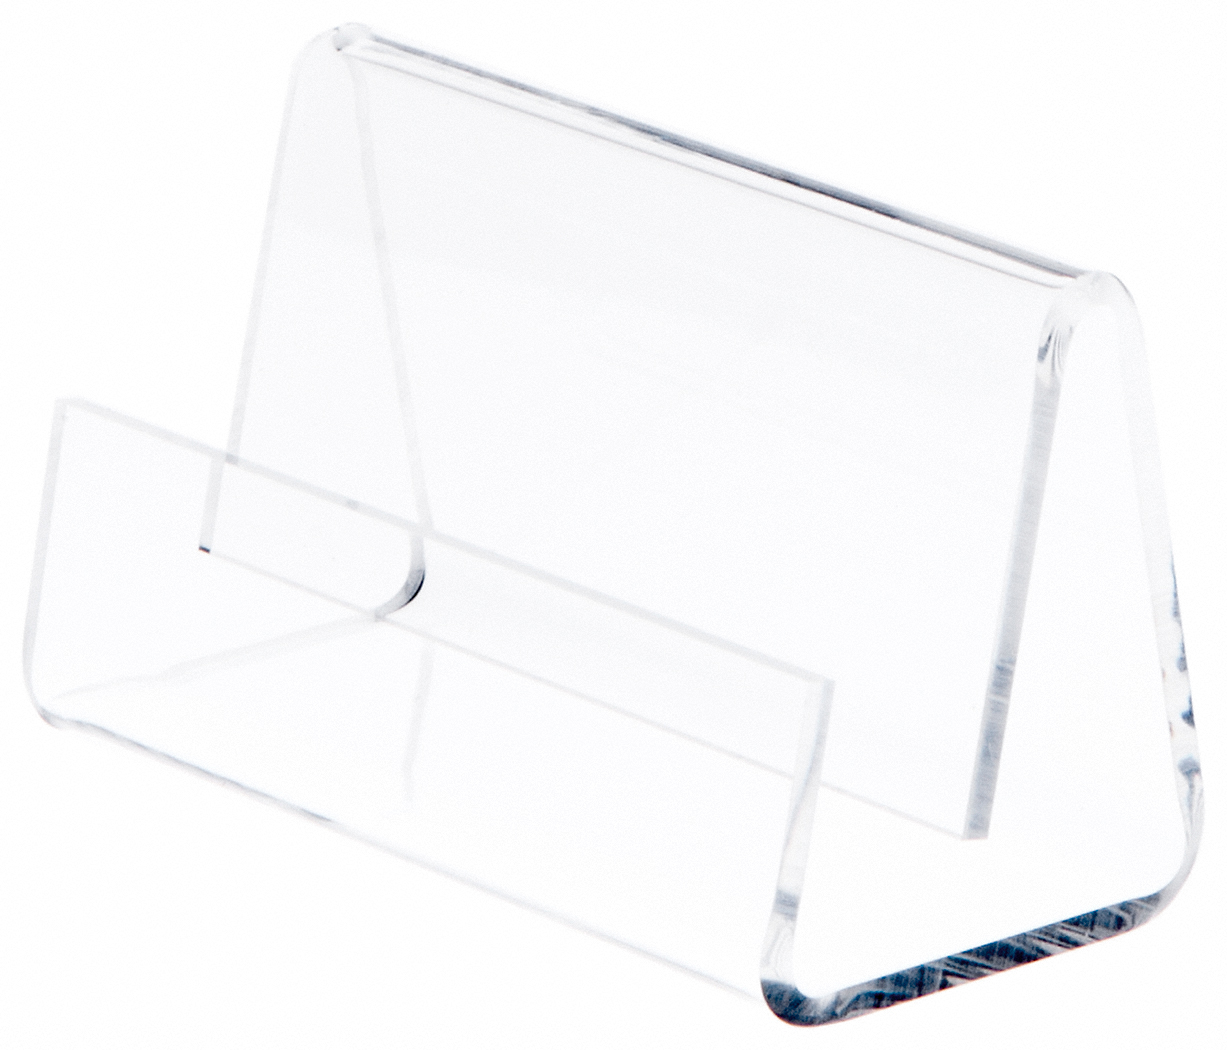 Plymor Clear Acrylic Deluxe Business Card / Postcard Holder, 3.5" W x 2.875" D x 2.125" H